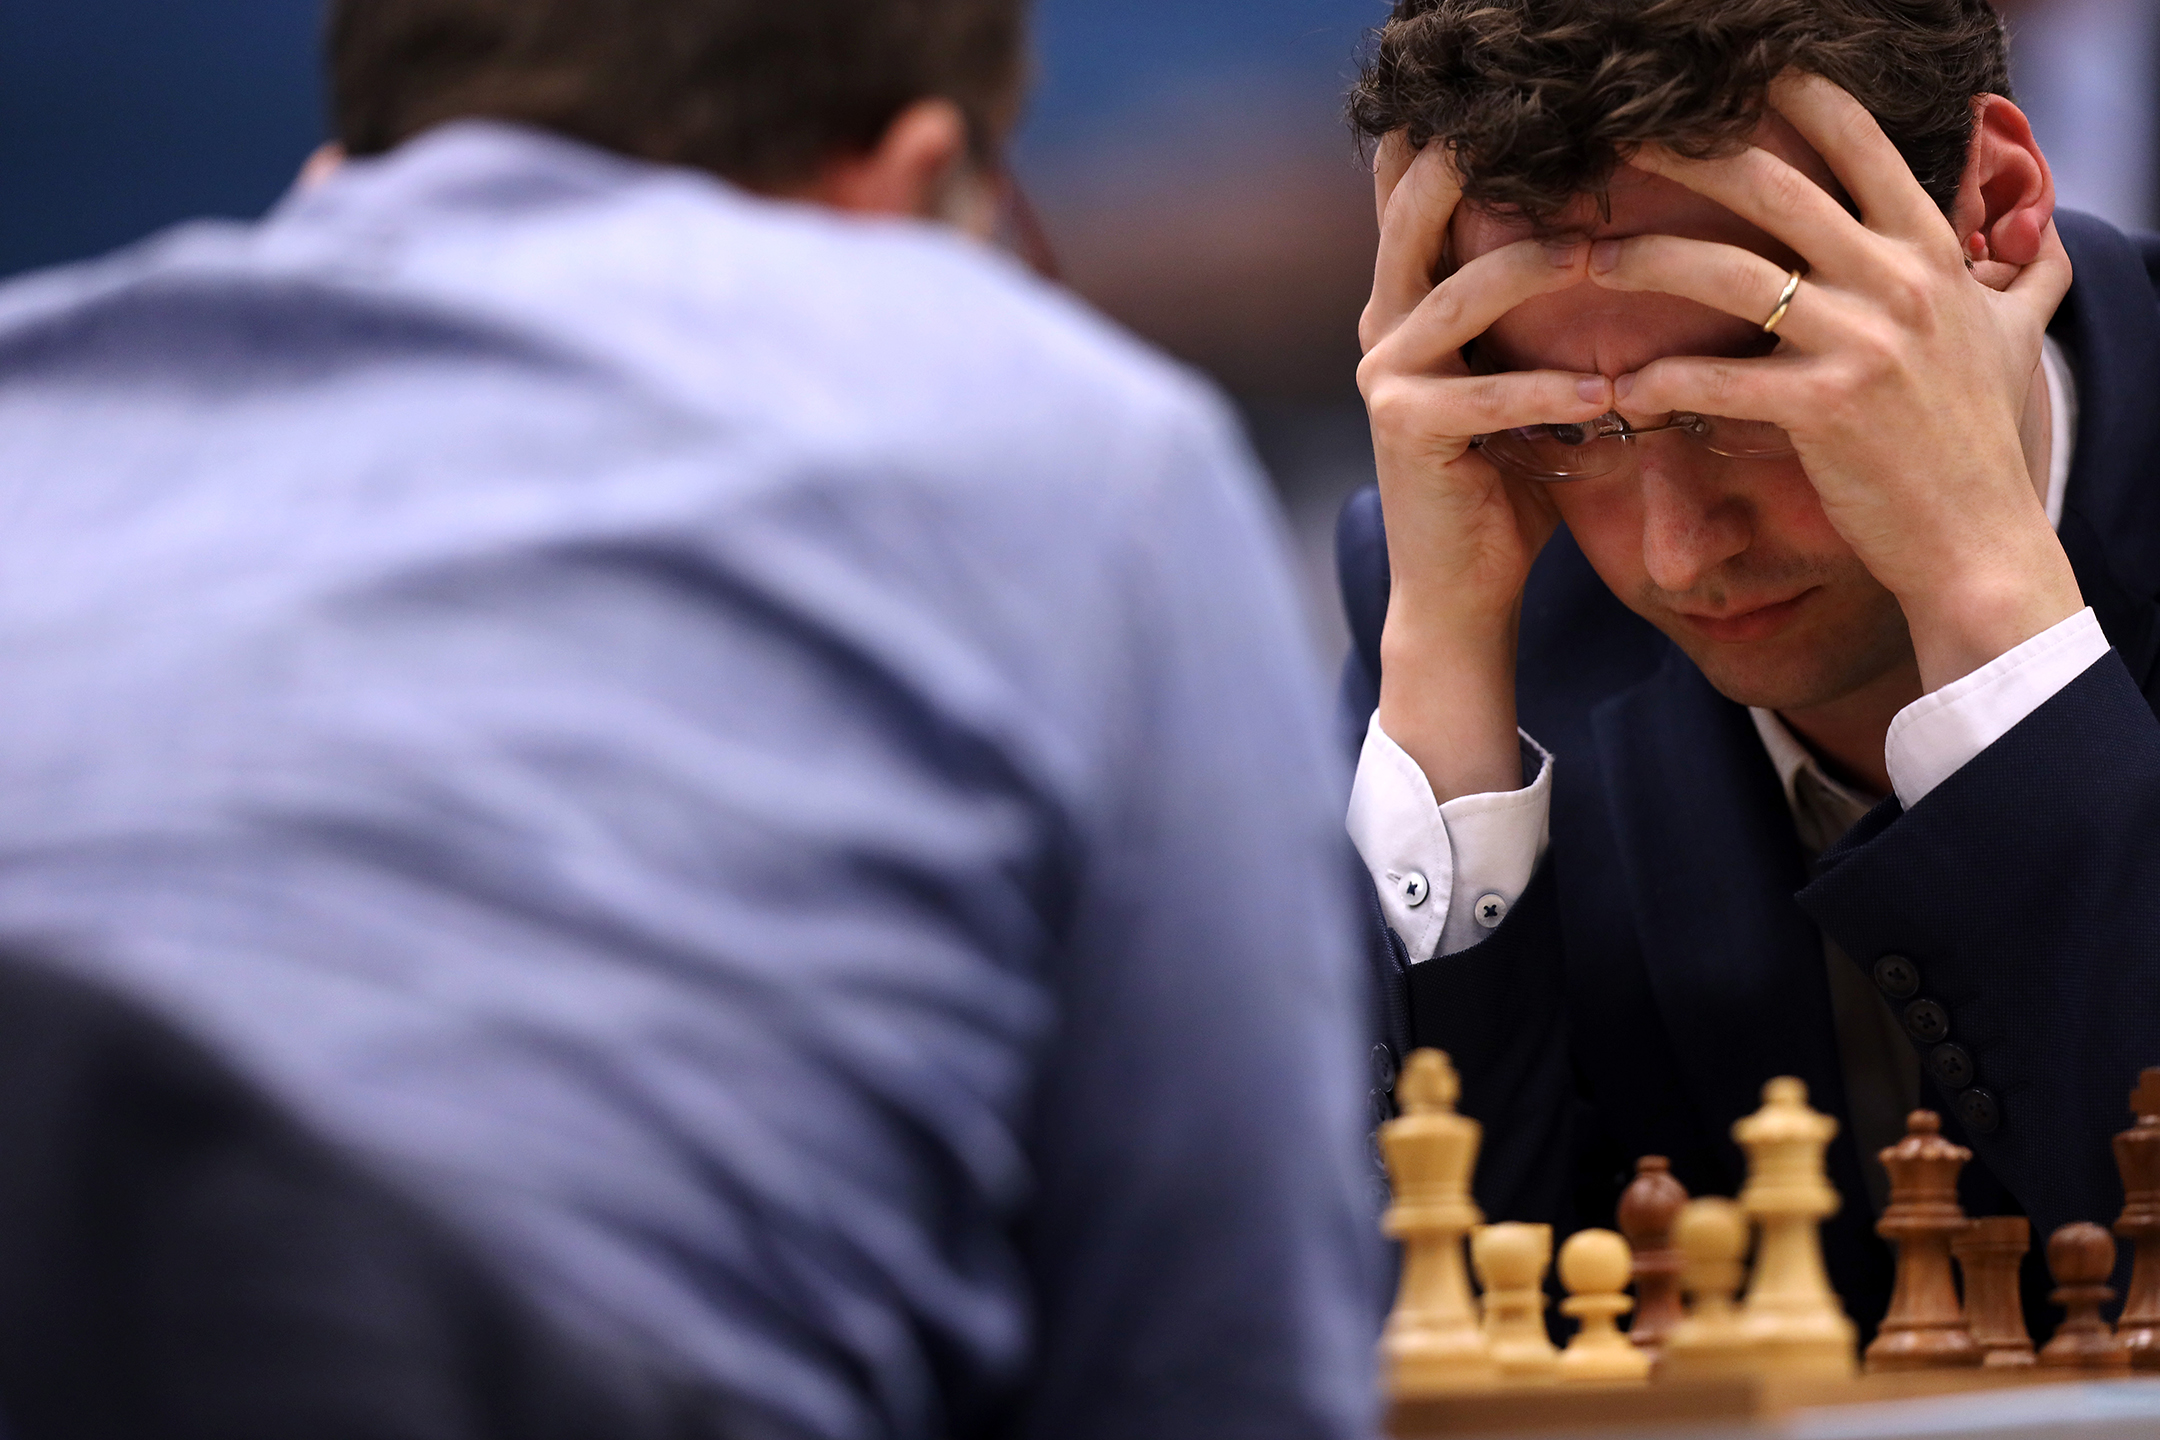 two men play chess, with one of them holding his head in his hands as he concentrates on making a move